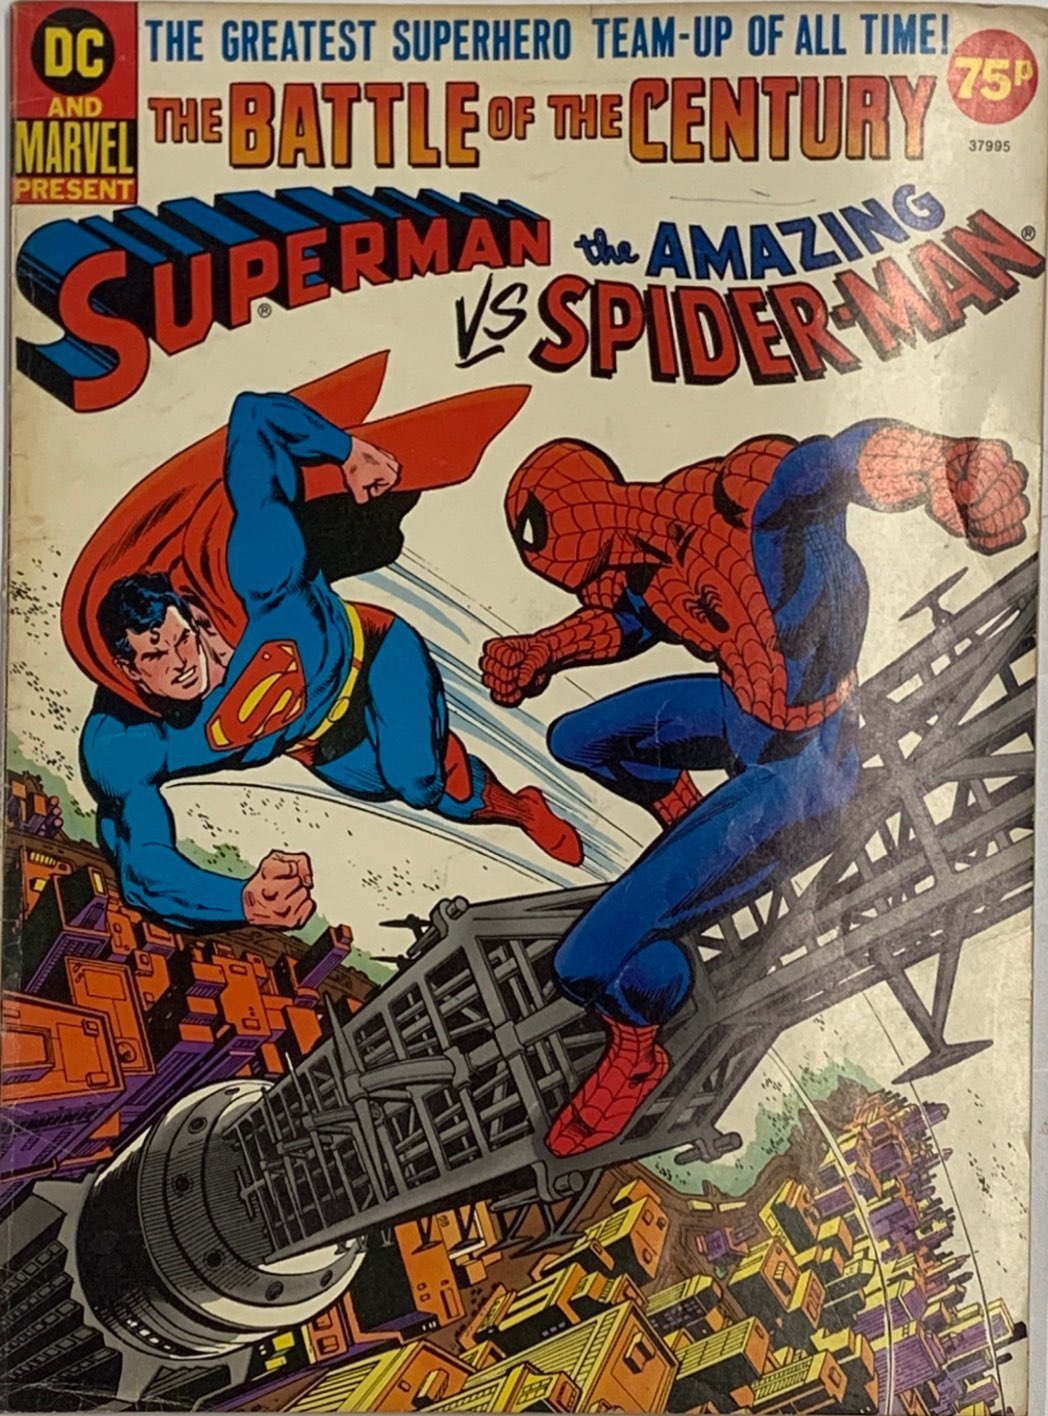 A copy of 'The Battle of the century' Superman vs Spiderman, DC and Marvel comics.